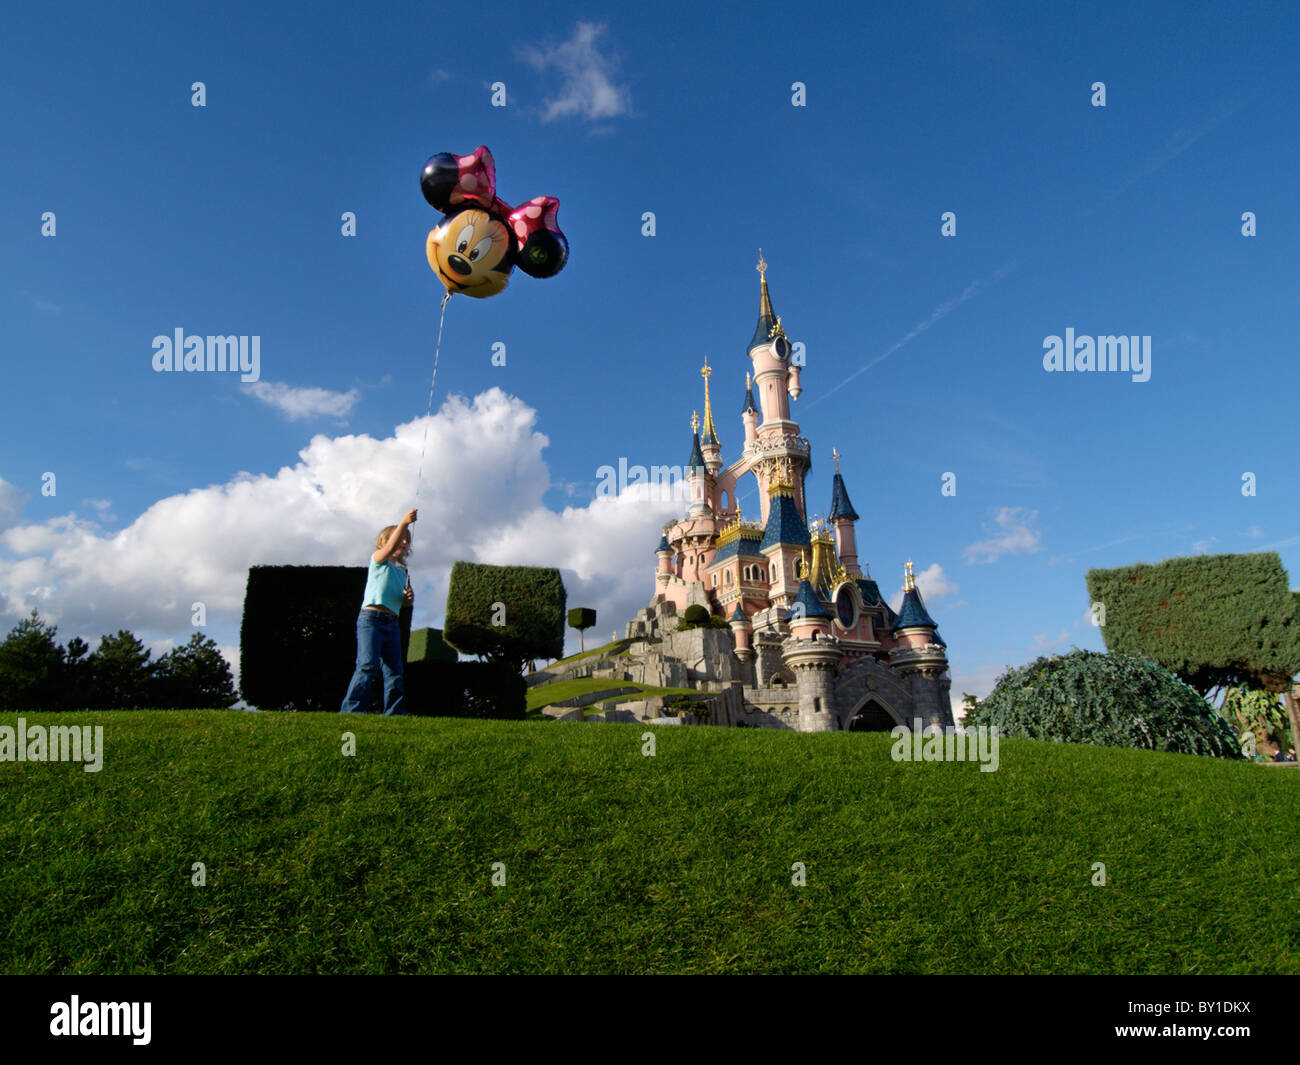 Little girl with Mickey Mouse balloon on a lawn in front of the sleeping beauty castle in Eurodisney, Paris, France Stock Photo